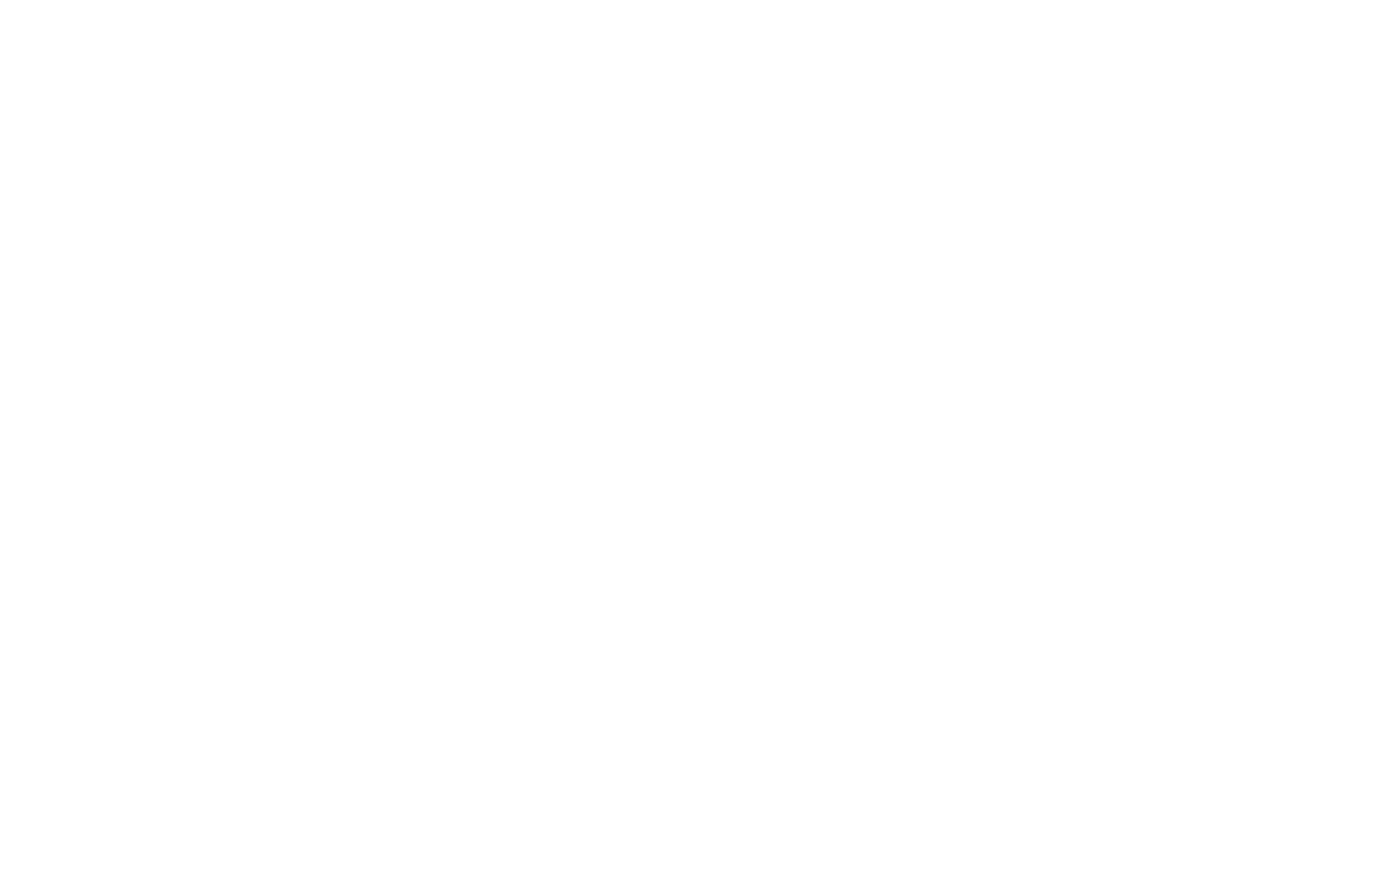 Octopus Learning